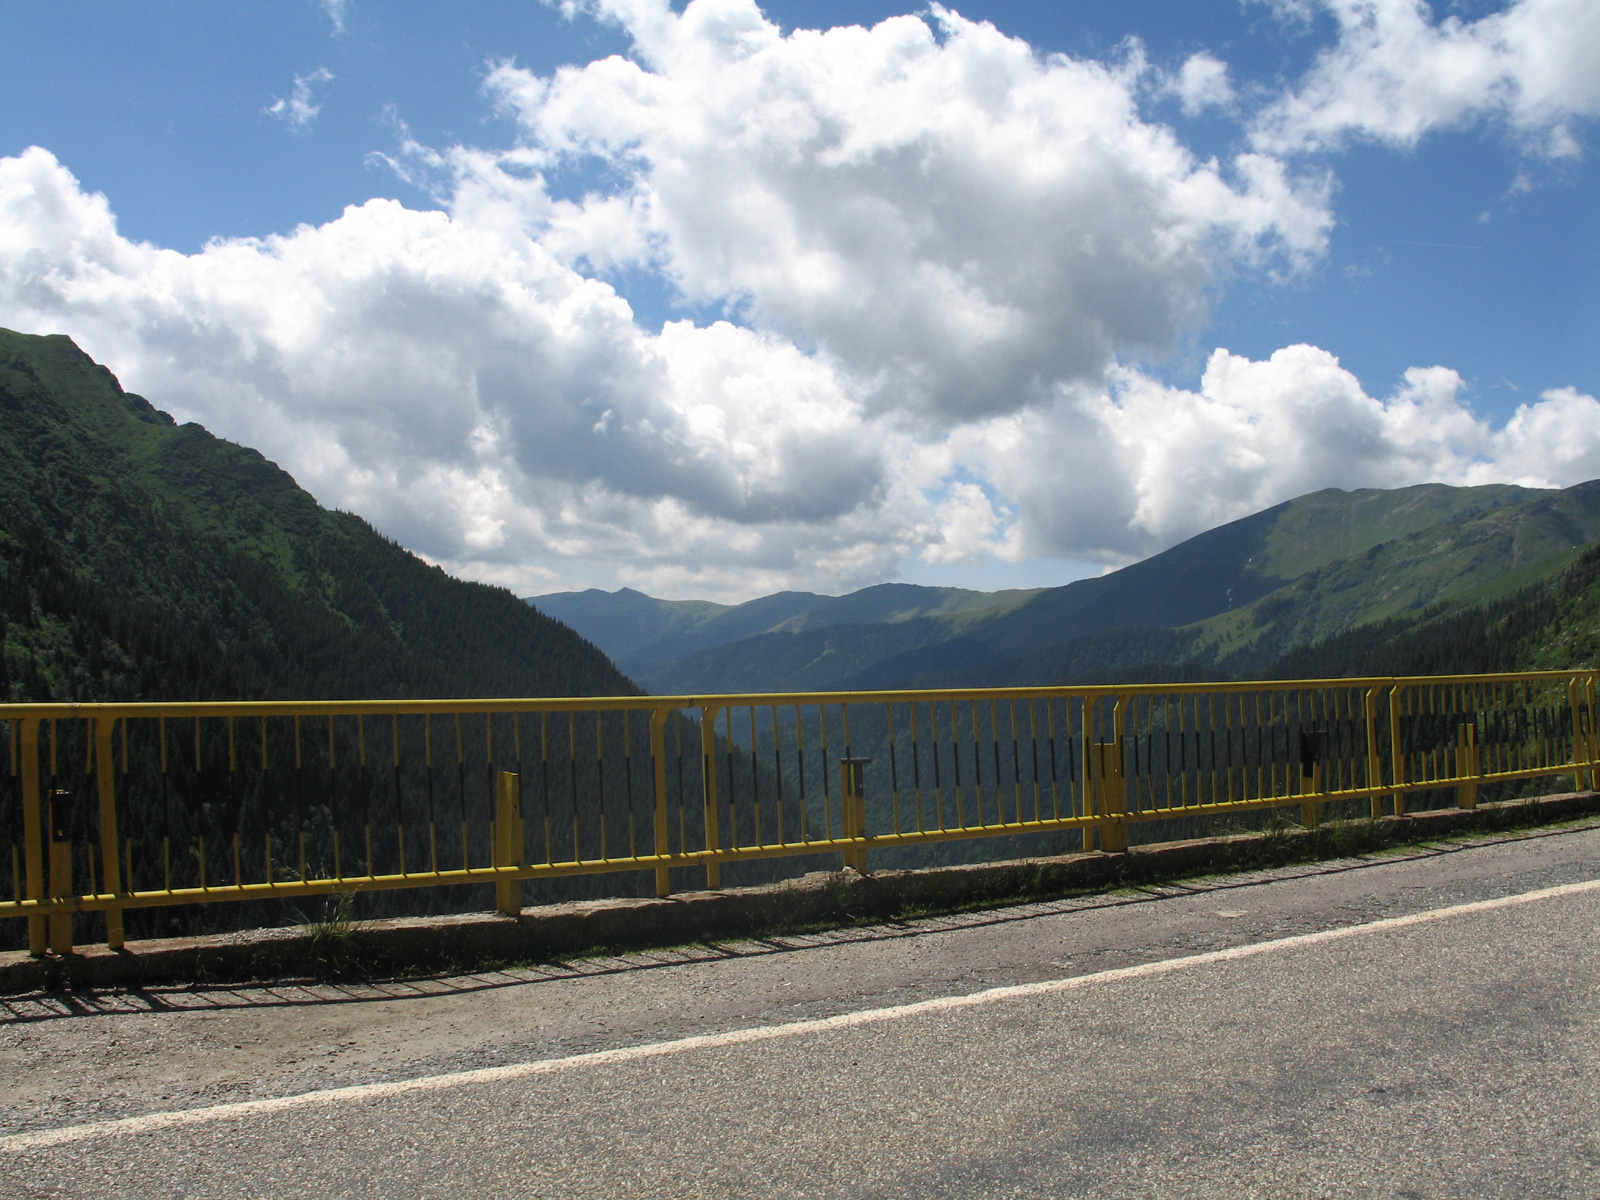 Landscape from a road with a yellow railing